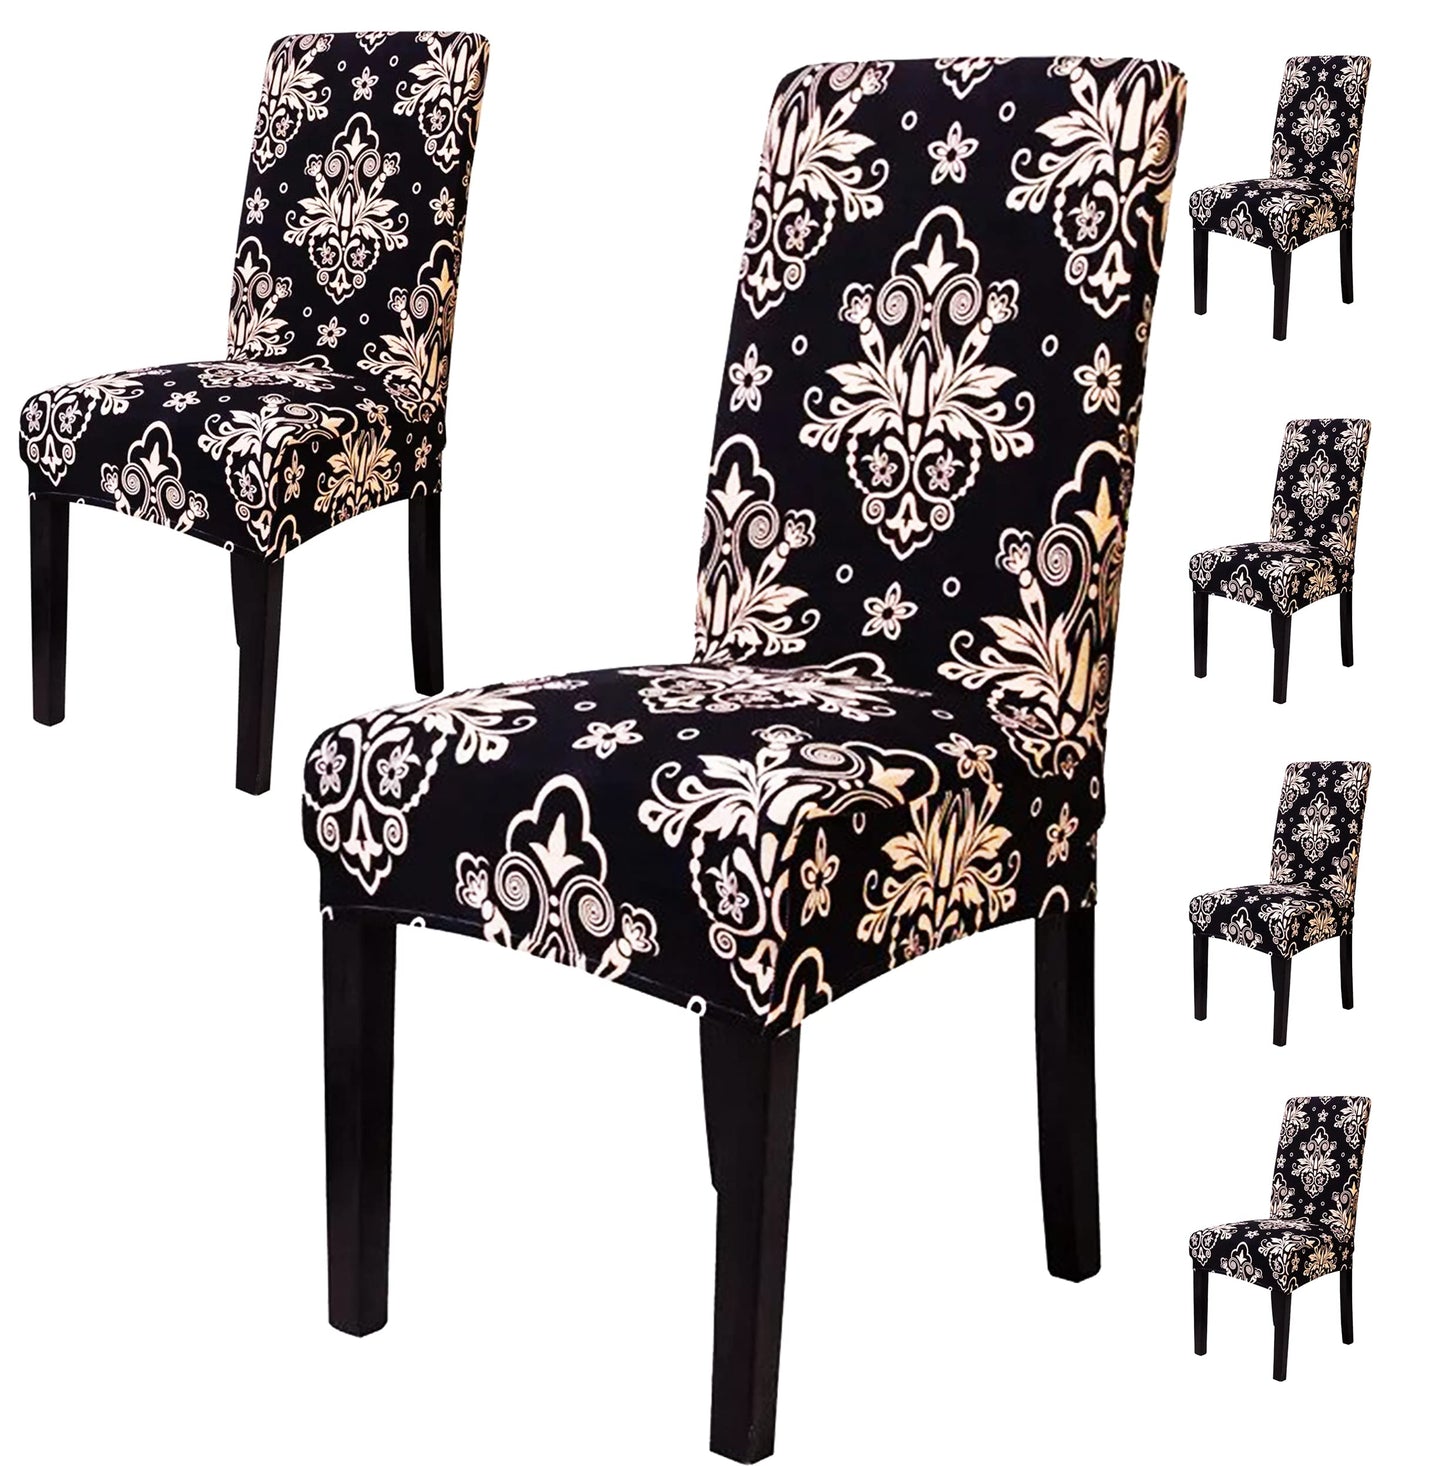 Floral Elastic Chair Cover (Cambric Black)